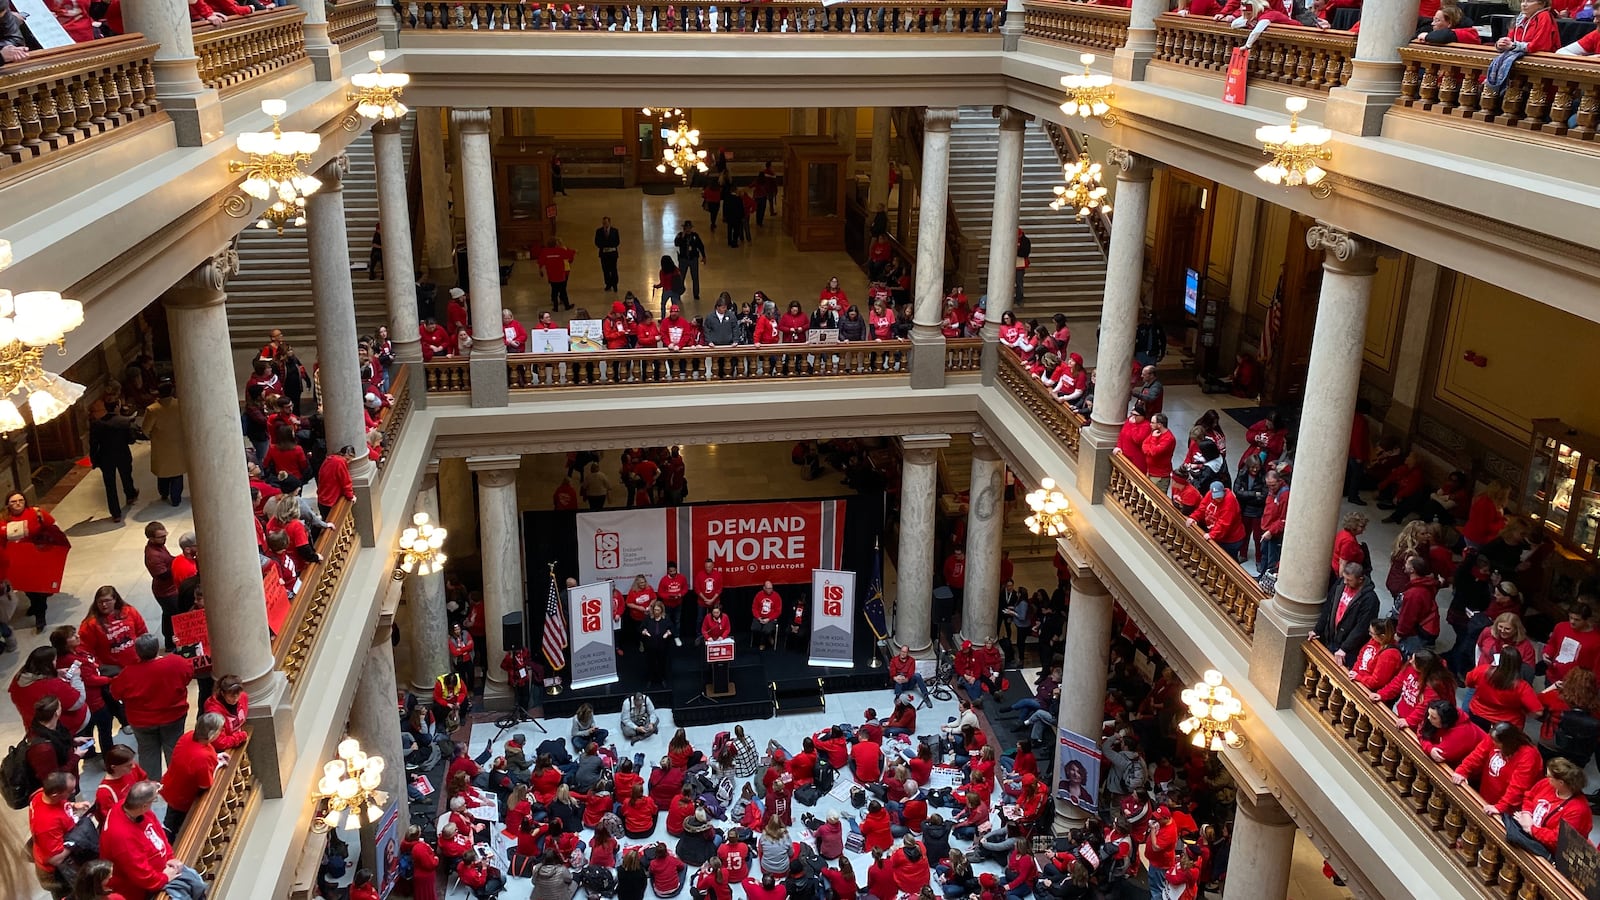 Thousands of Indiana teachers converged on the Statehouse at the Red for Ed rally on Tuesday, Nov. 19, 2019.